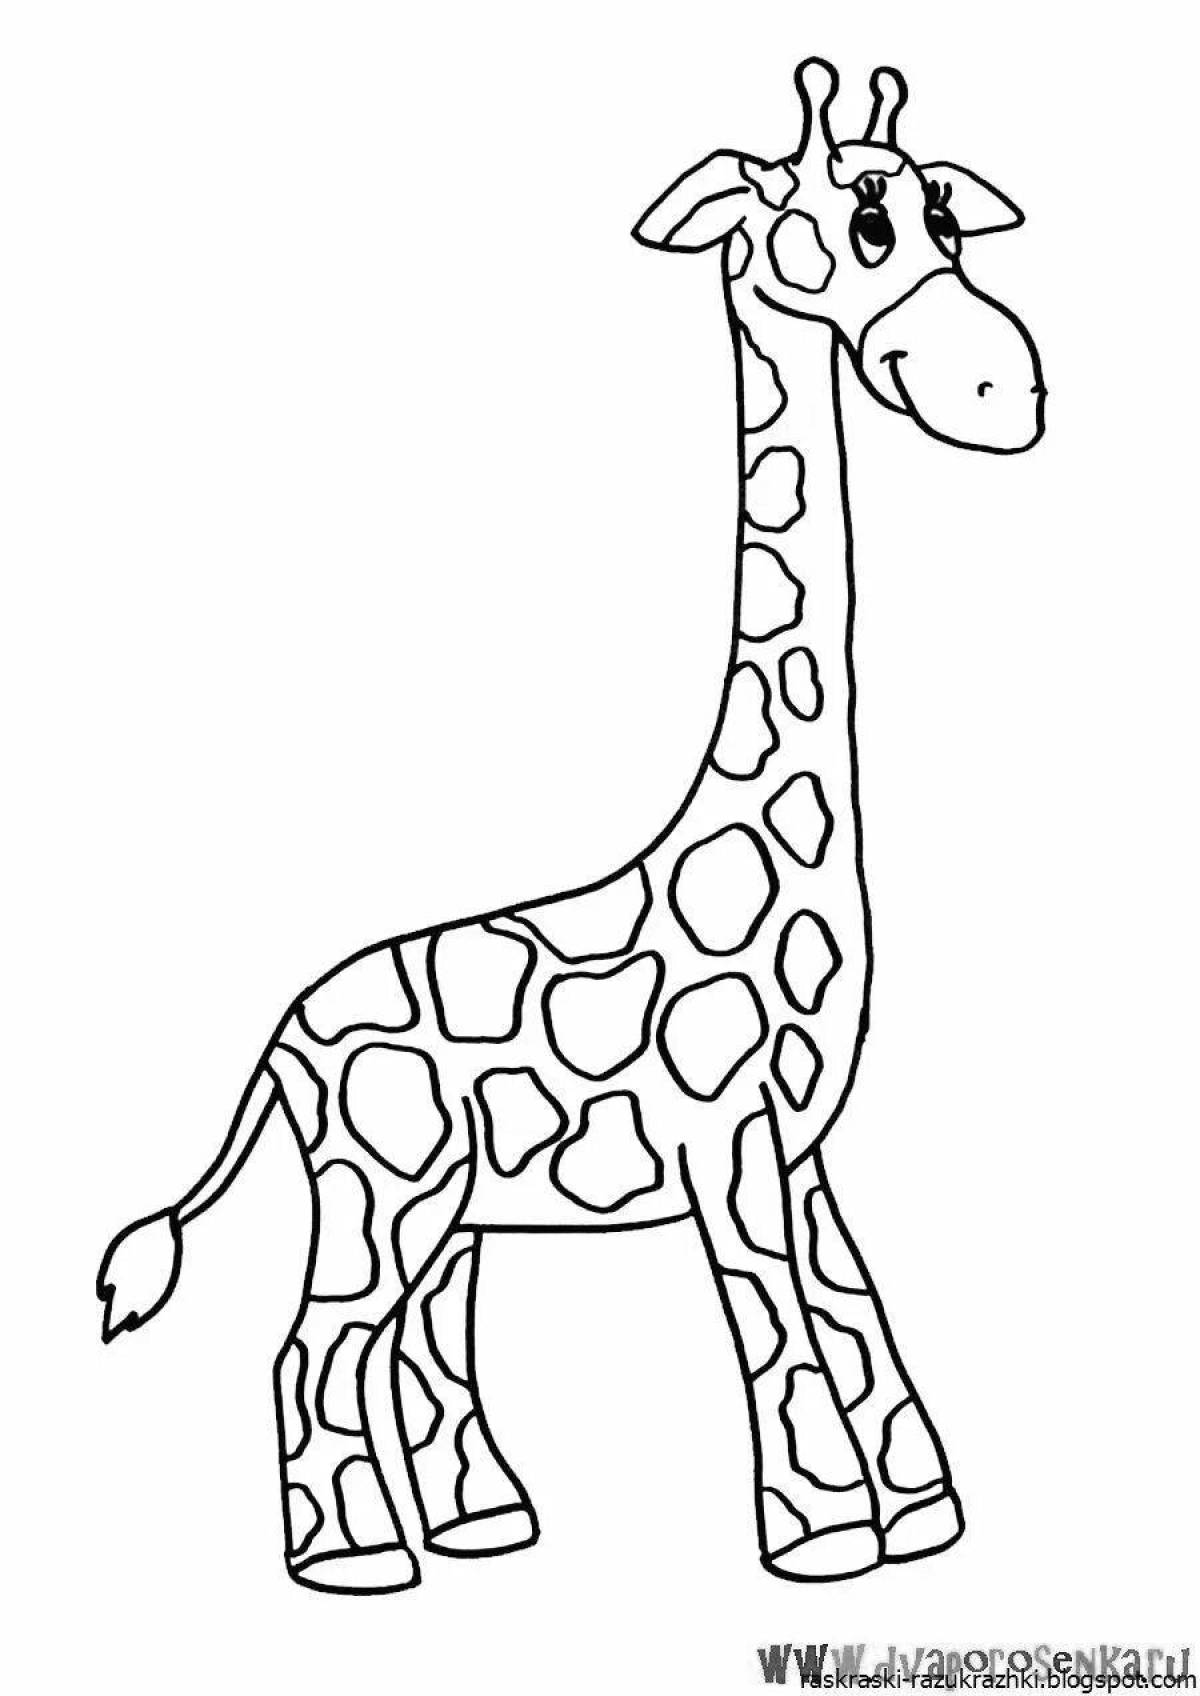 Adorable Giraffe Coloring Page for Primary School Children